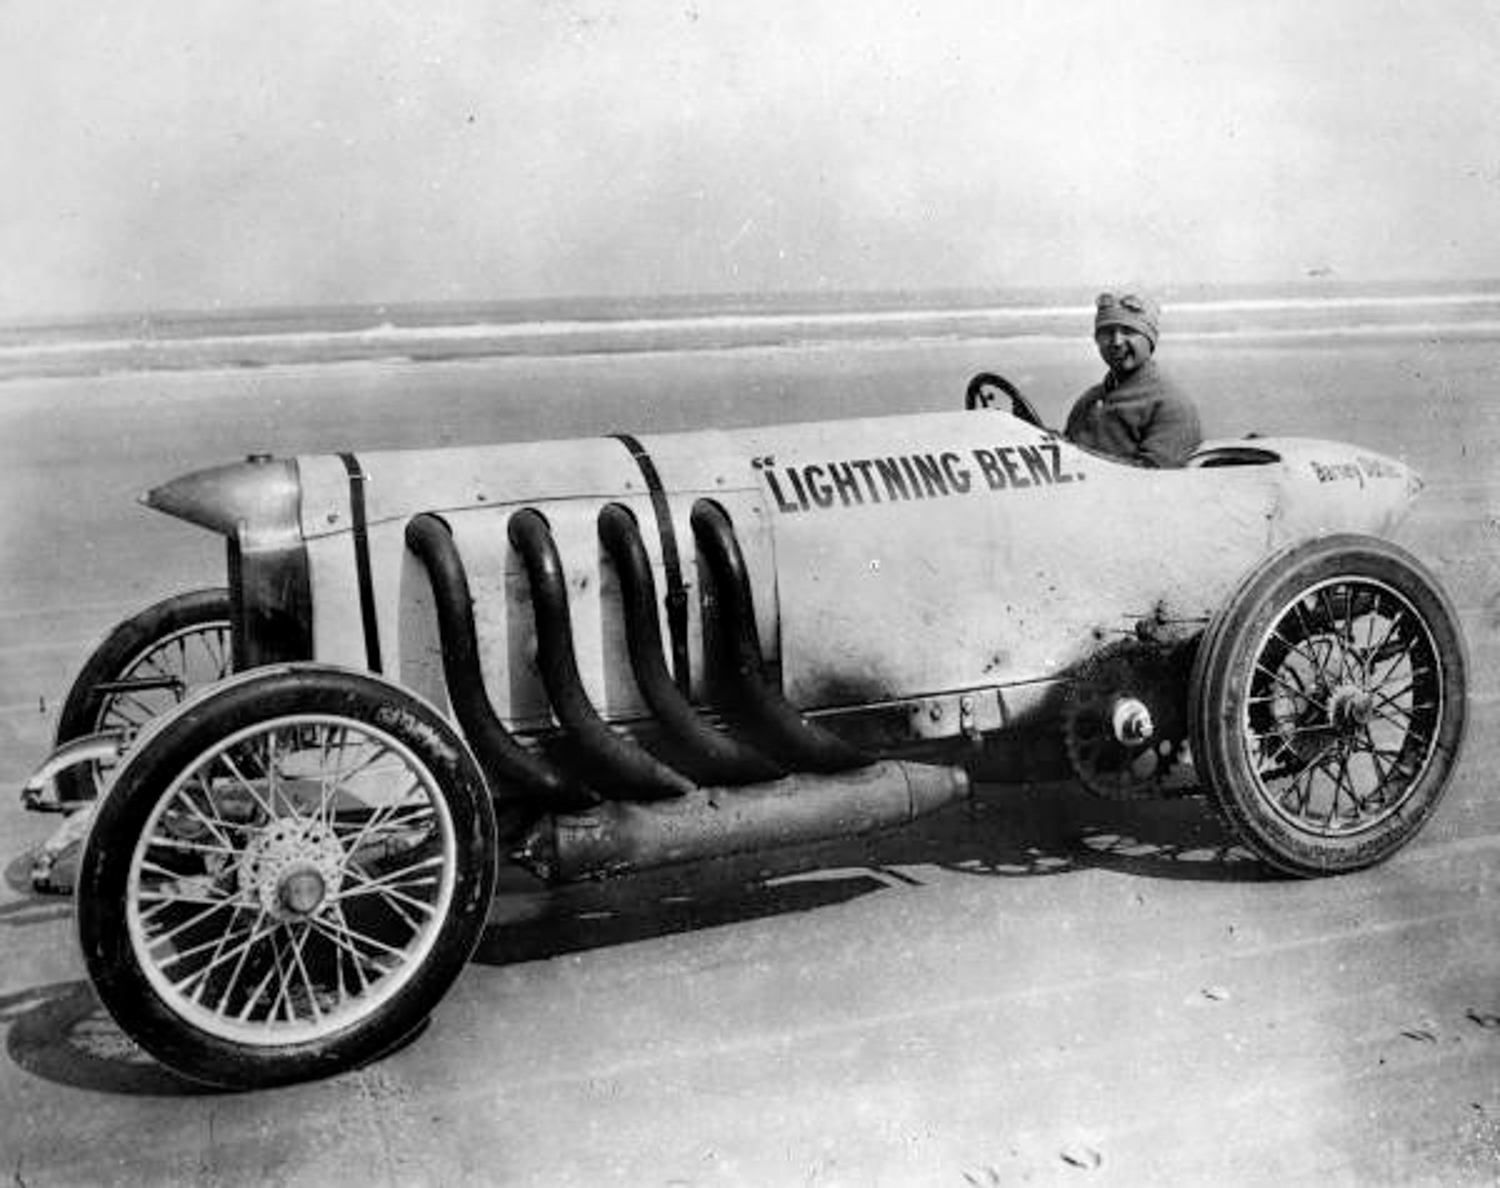 Oldfield paid $4000 for the Lightning Benz and set numerous speed records with it. 